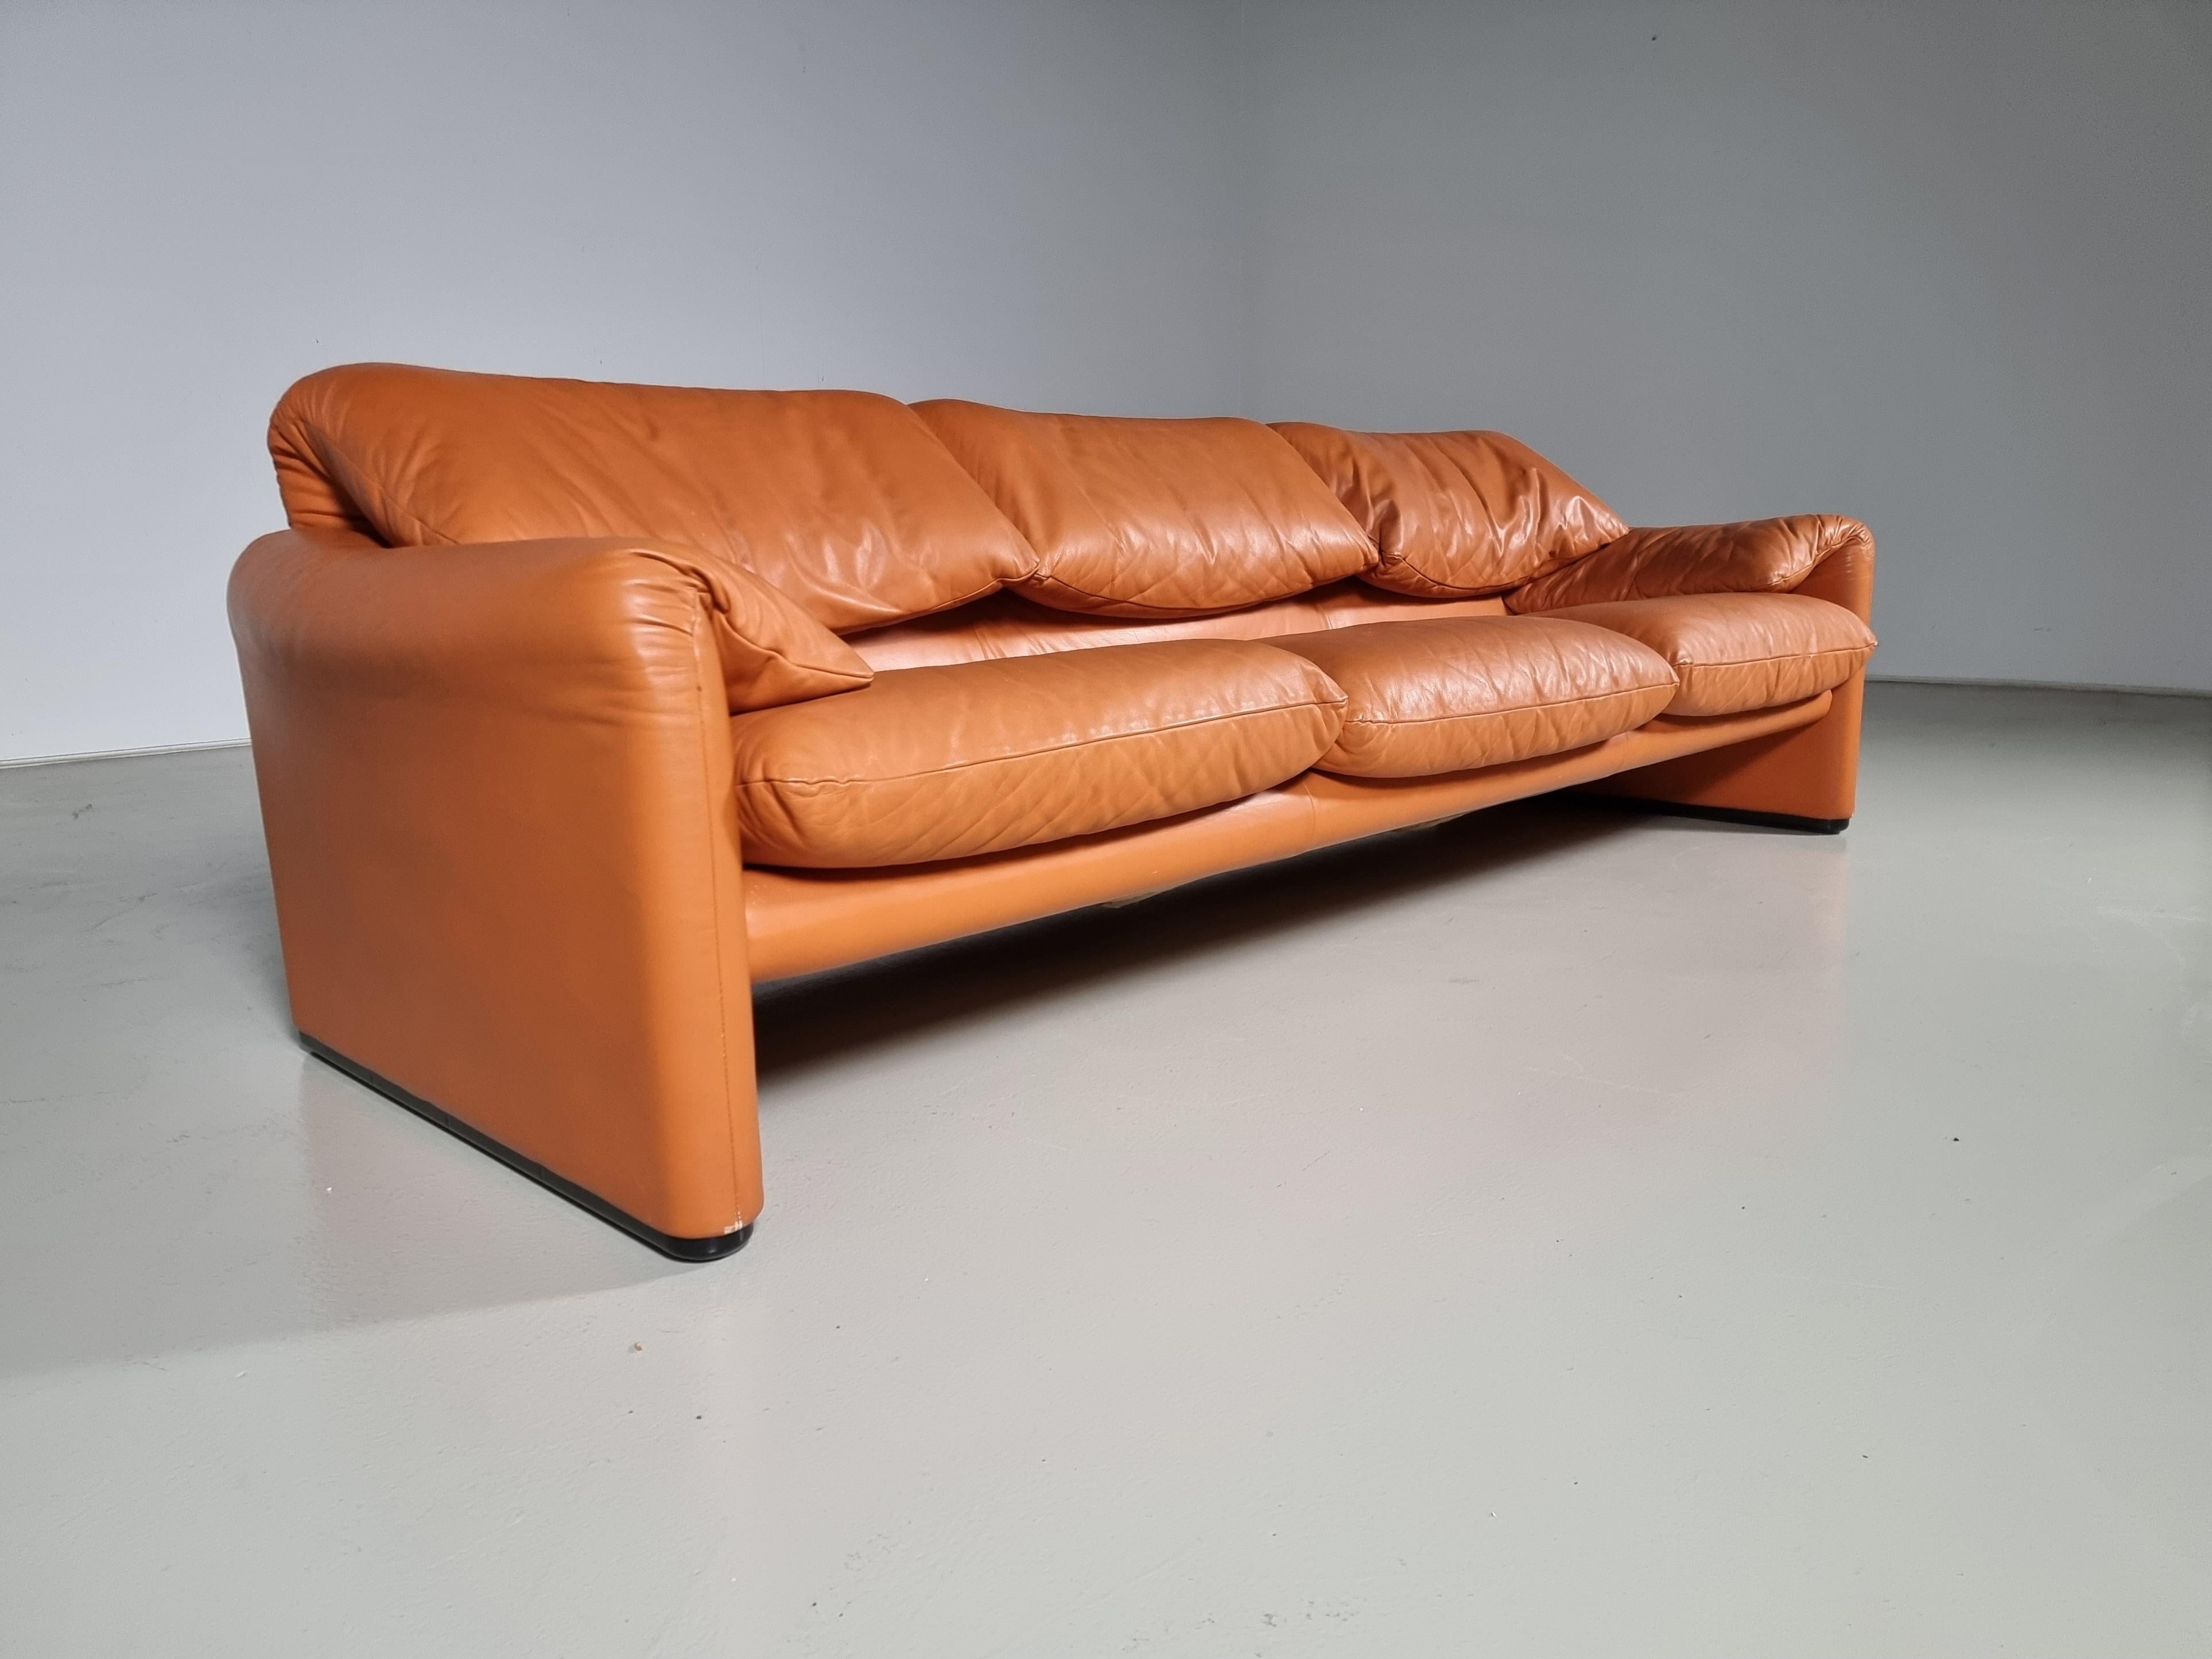 This Maralunga sofa was designed by Vico Magistretti for Cassina in 1973. It is an original version from the seventies. The amazing original cognac leather is in very good condition. With steel structure. The backrests can be raised or lowered for